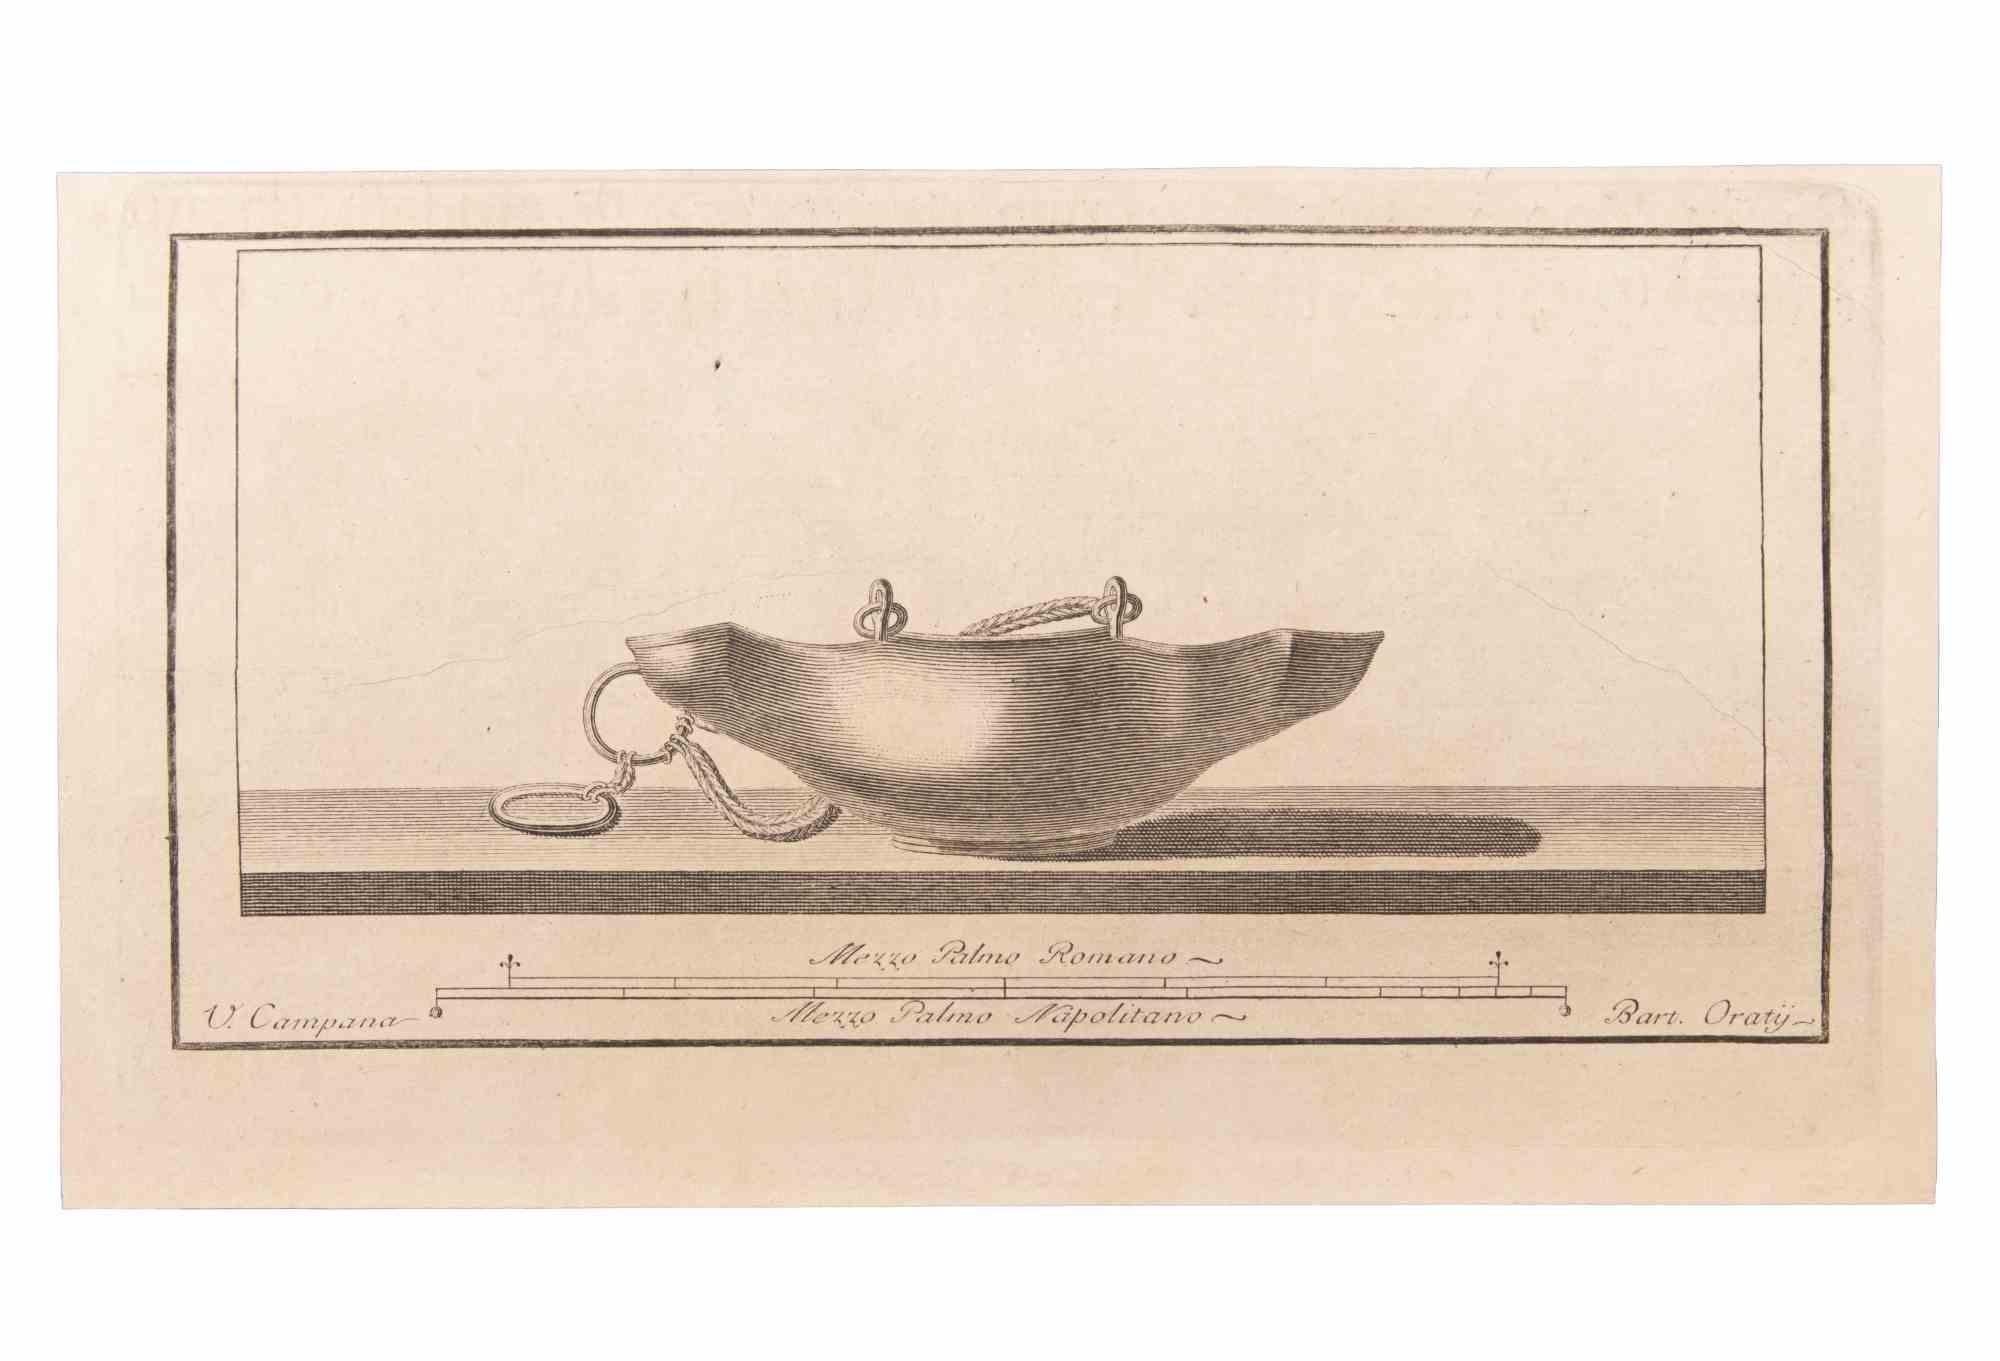 Oil Lamp to Hang is an Etching realized by Vincenzo Campana (1730-1806).

The etching belongs to the print suite “Antiquities of Herculaneum Exposed” (original title: “Le Antichità di Ercolano Esposte”), an eight-volume volume of engravings of the